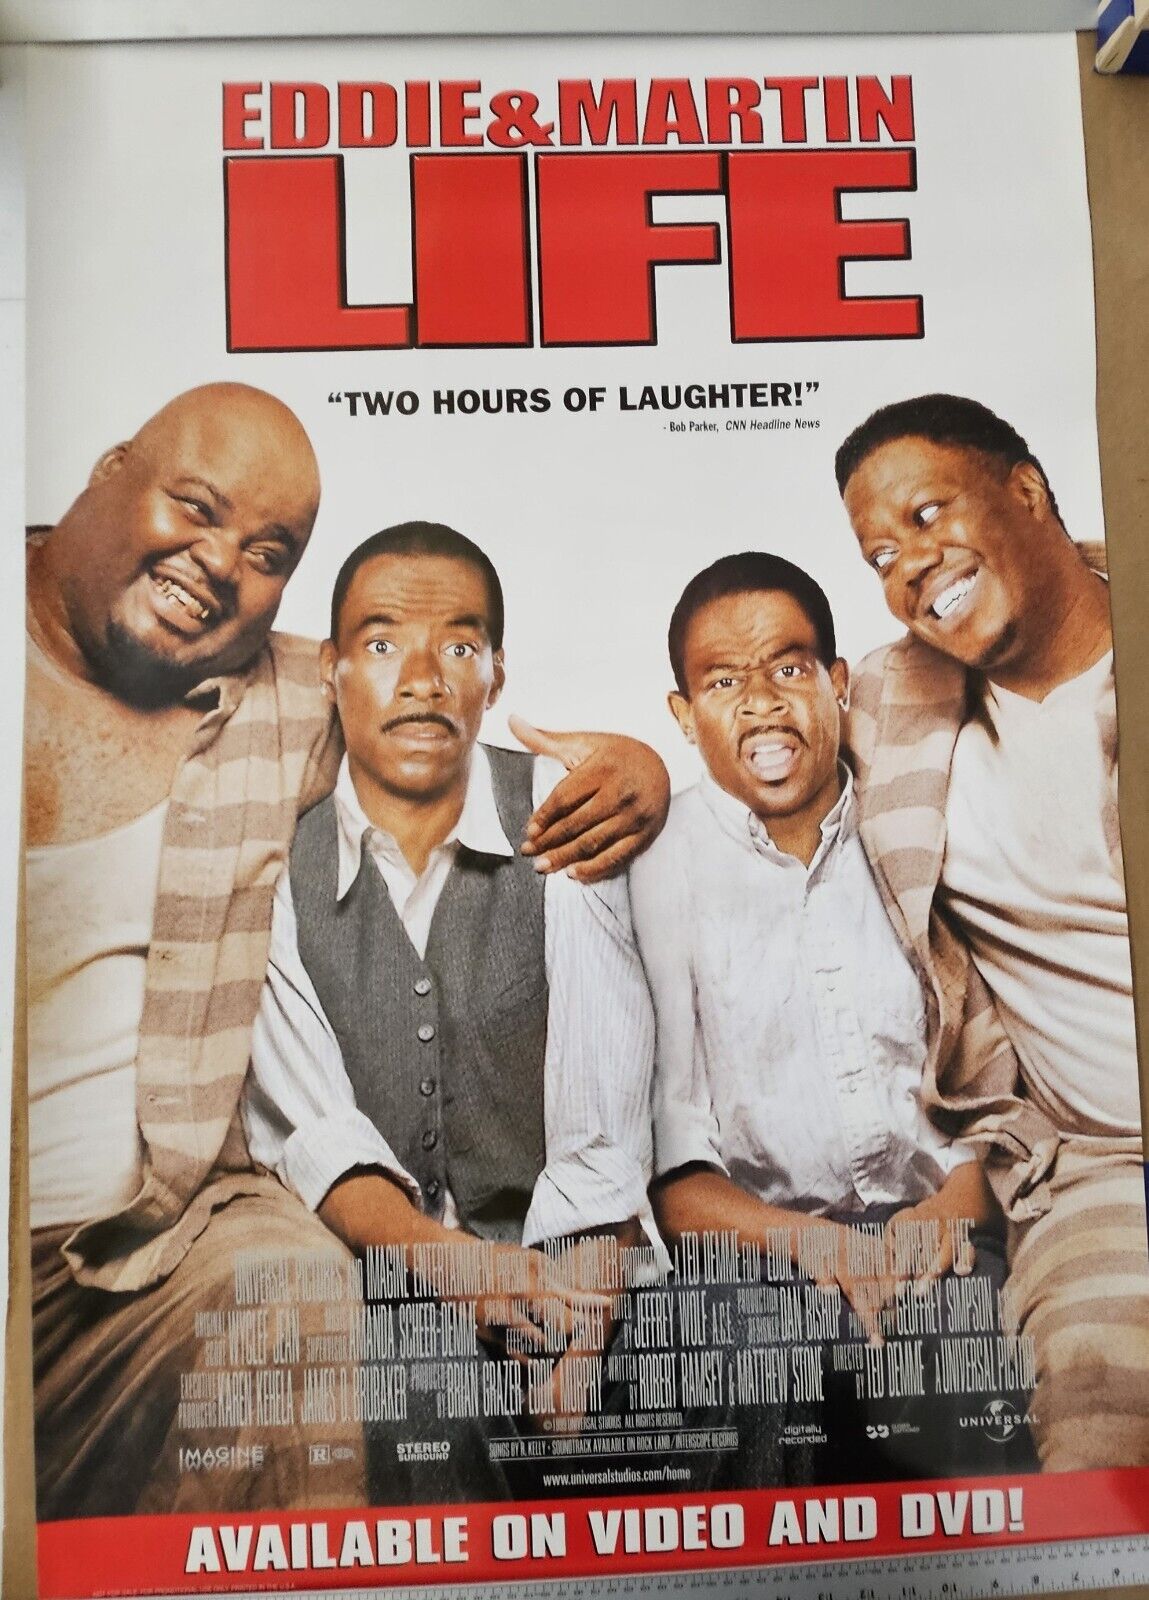 Eddie murphy Martin Lawrence in LIFE  27 x 40  DVD promotional Movie poster